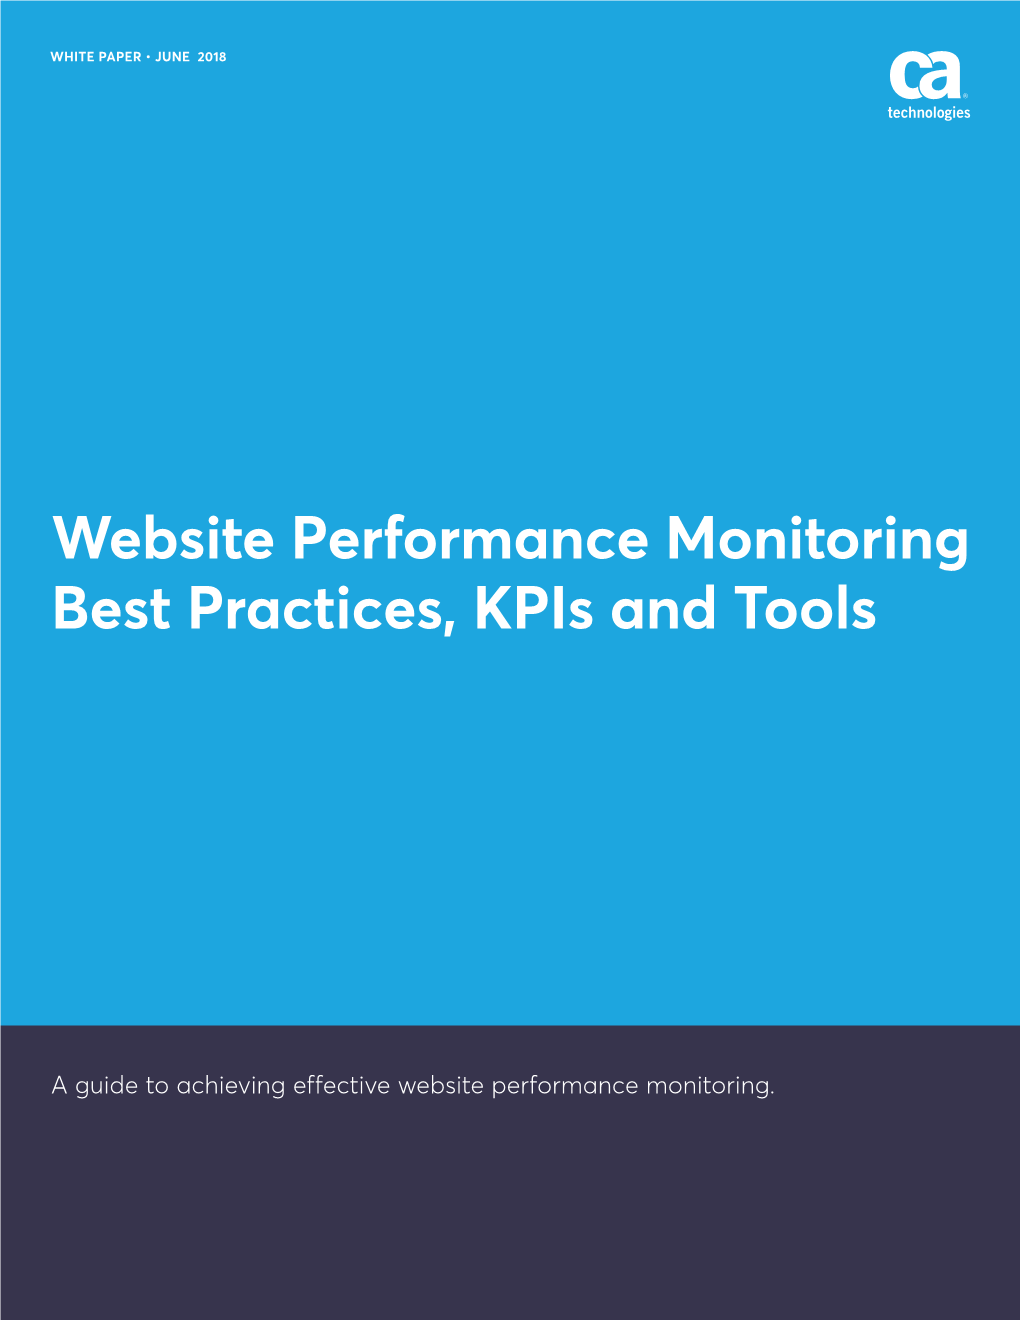 Website Performance Monitoring Best Practices, Kpis and Tools